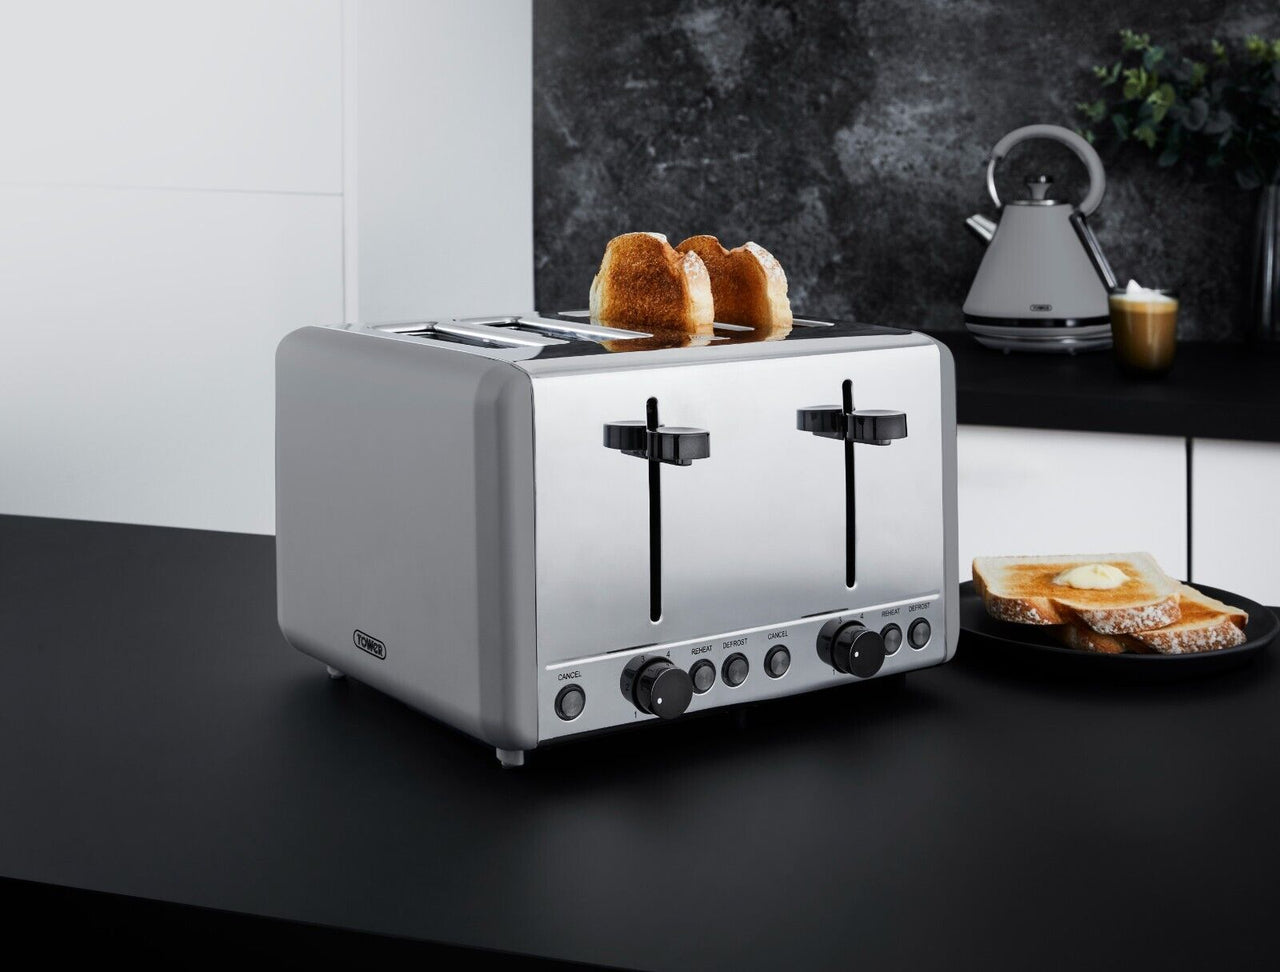 Tower Sera 4 Slice 1800W Toaster in Matte Grey with Black Trim T20086GRY